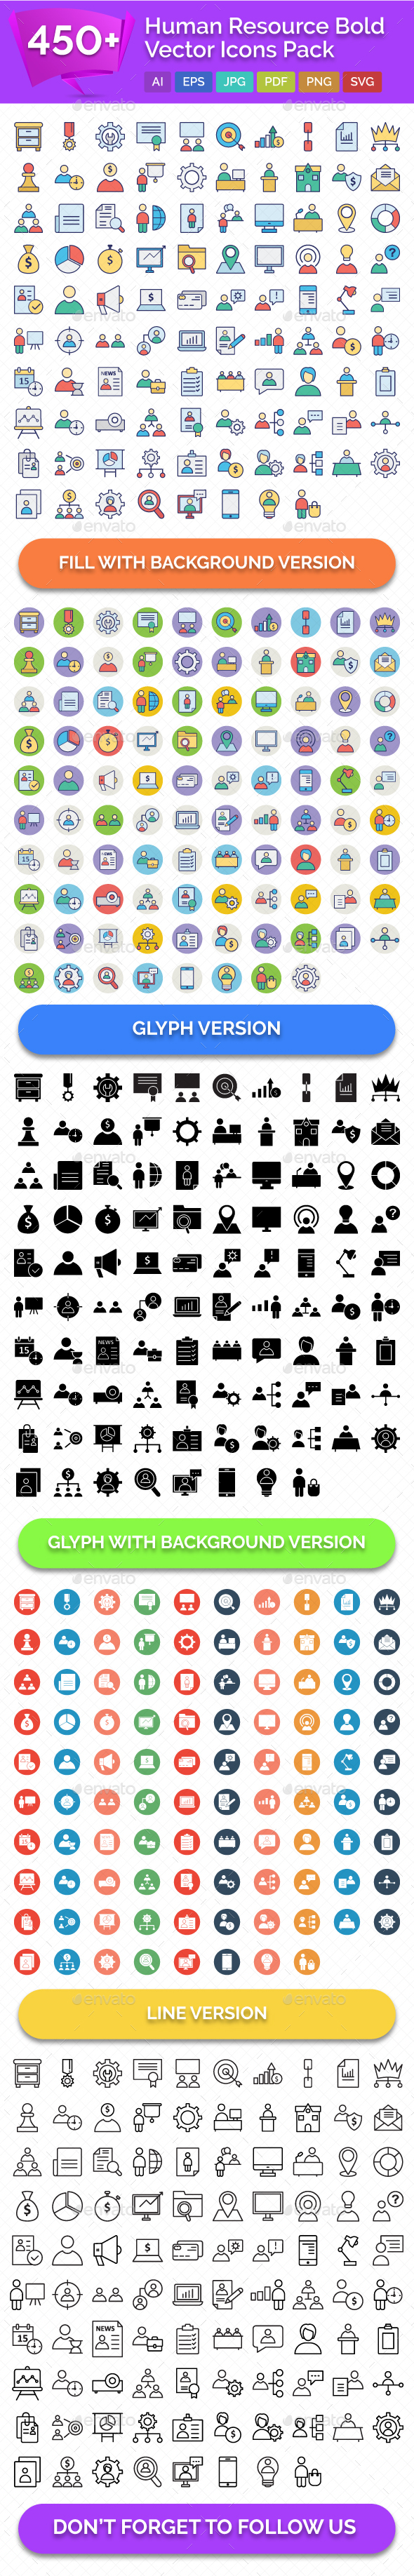 450+ Human Resource Bold Outline Vector Icons Pack